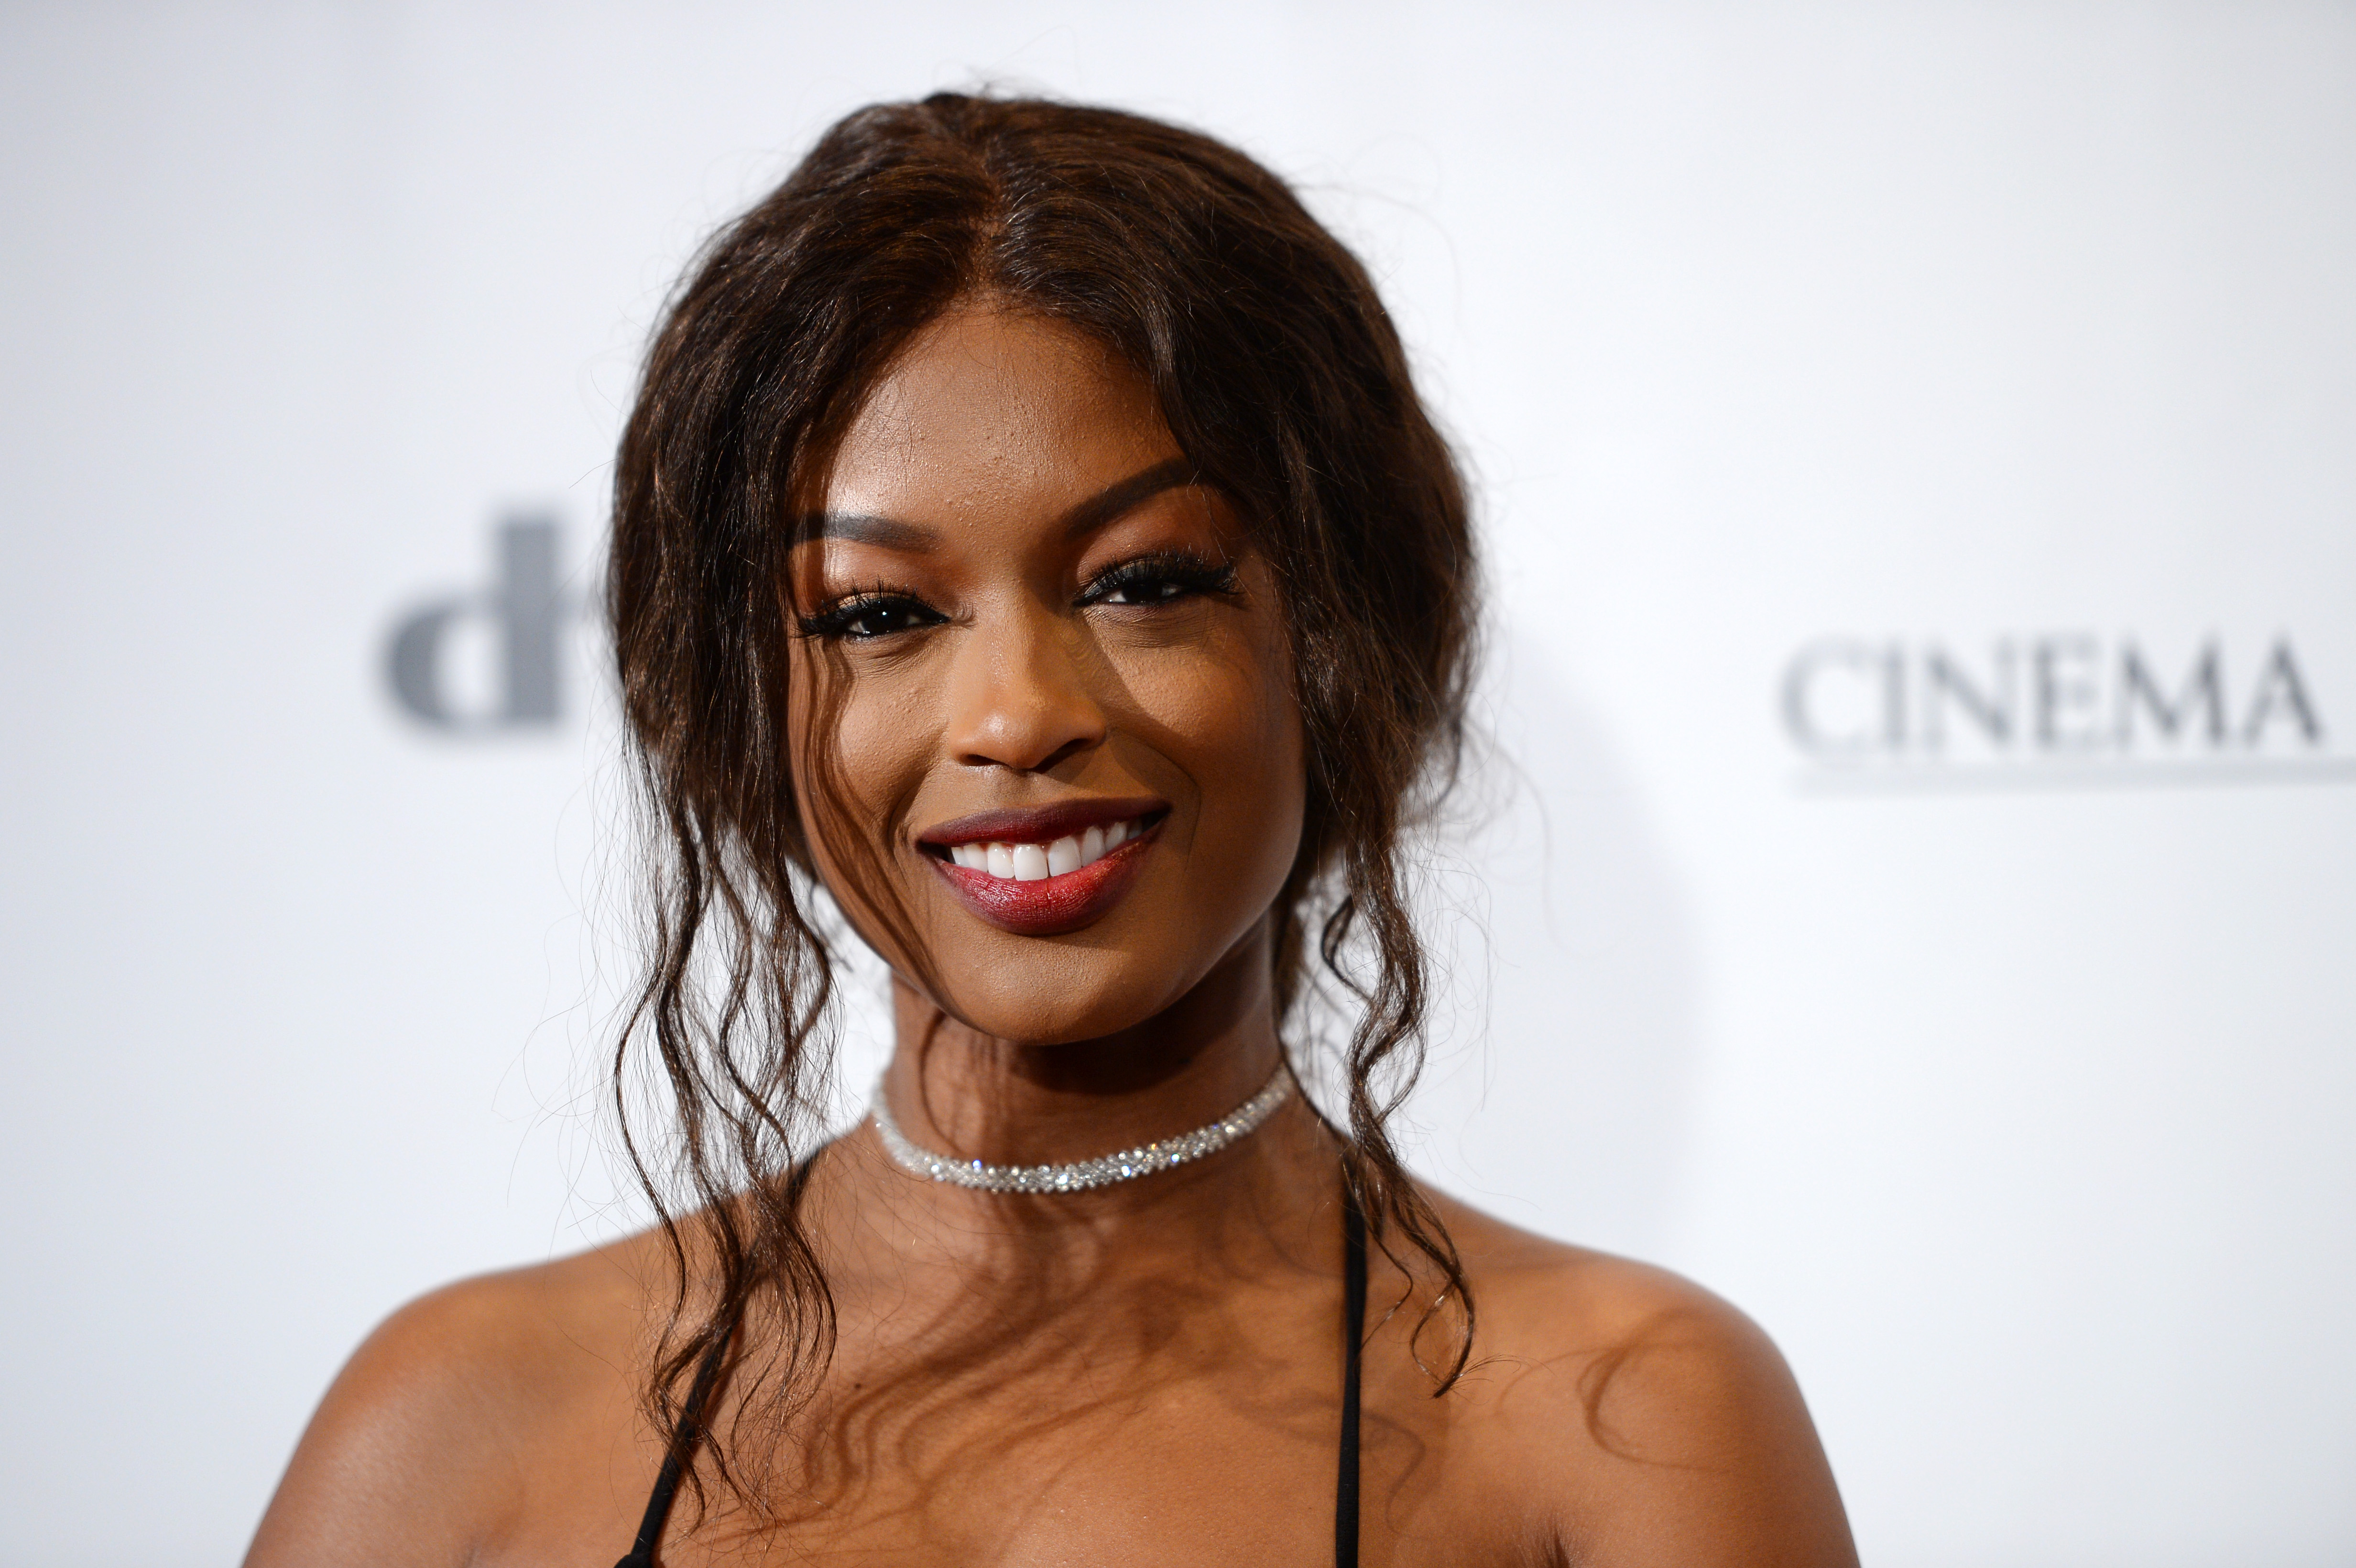 'Batwoman' star Javicia Leslie with her hair pulled back and wearing a necklace on the red carpet